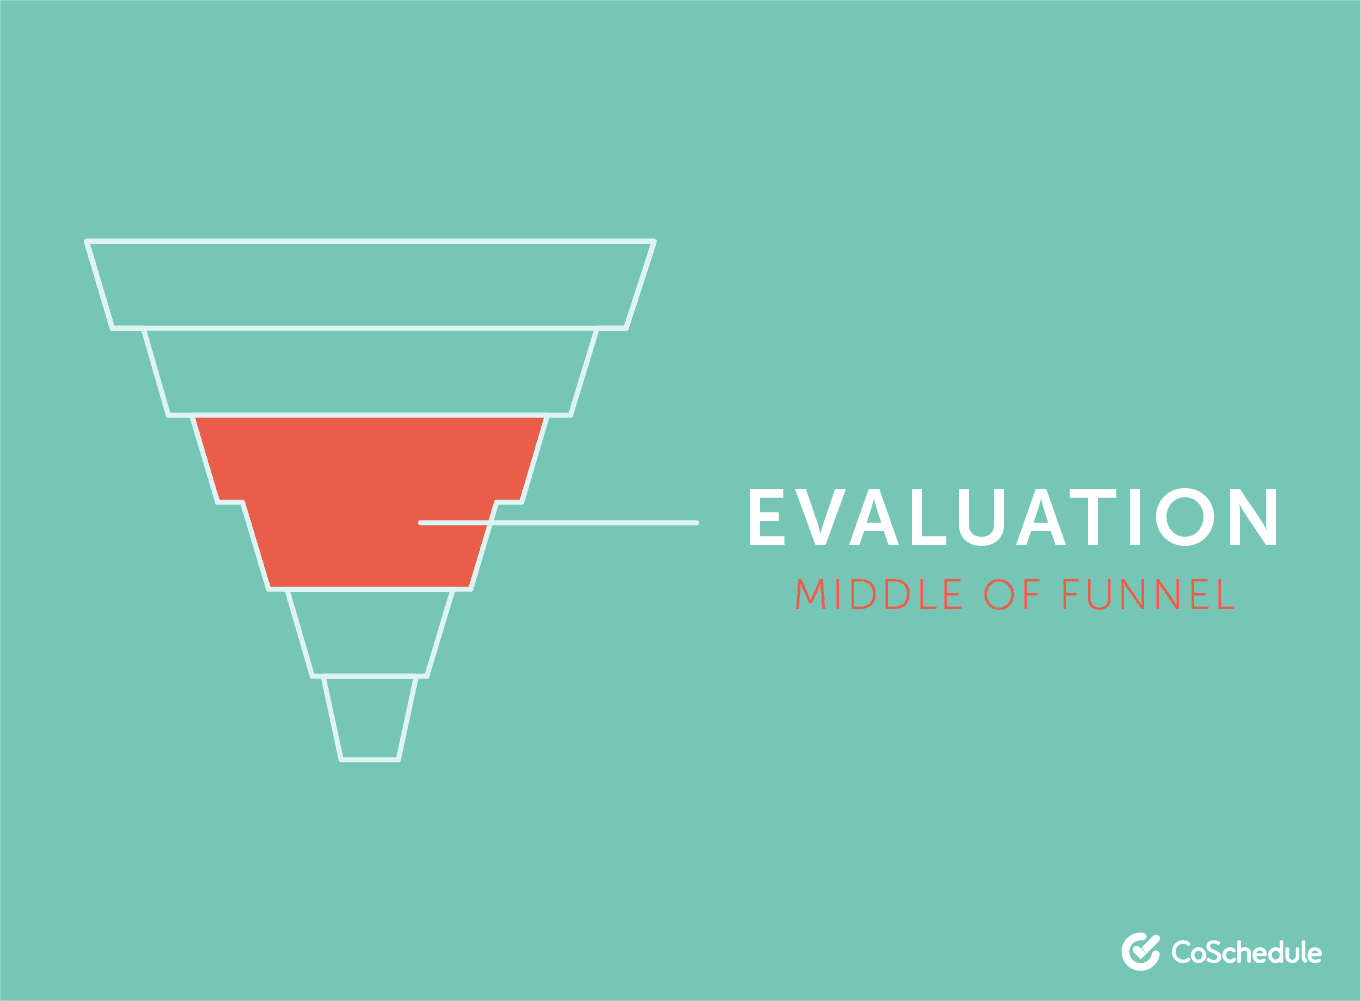 Evaluation stage of the marketing funnel